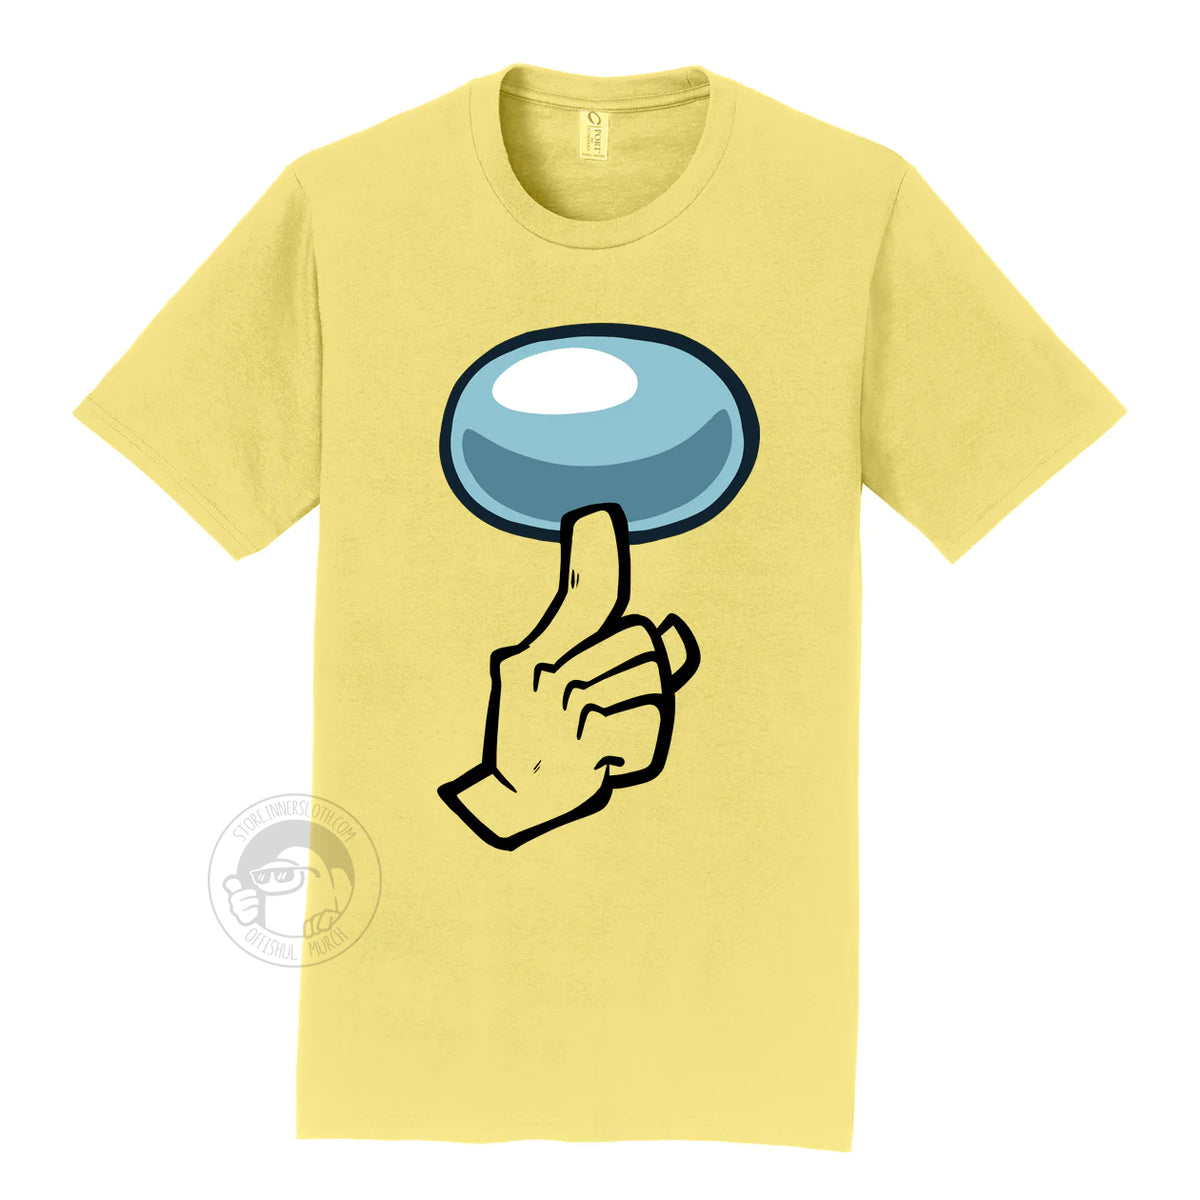 A product photograph of the Among Us: Shhhirt t-shirt in yellow. The art on the shirt shows the crewmate visor and a hand with one finger pointing up in a “shh”ing pose.